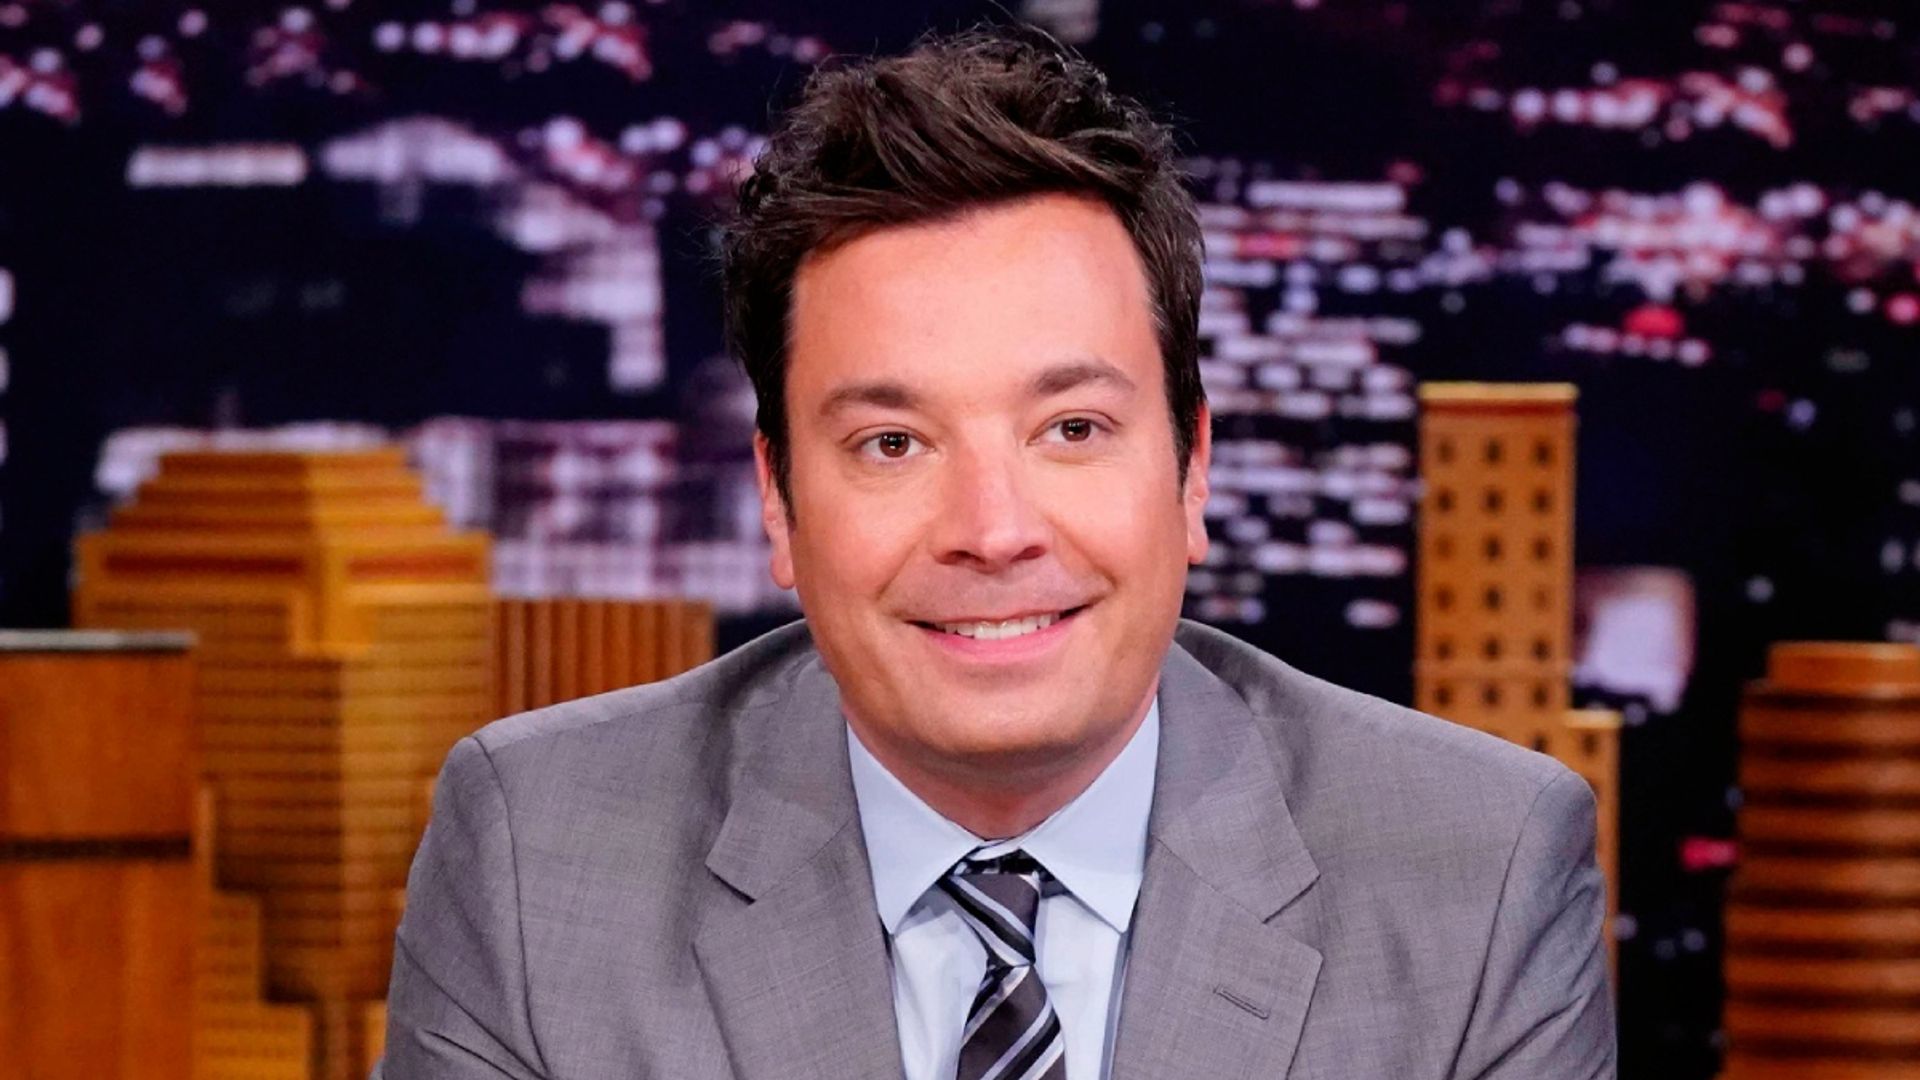 Jimmy Fallon stirs the pot with hilarious on-air argument following big announcement